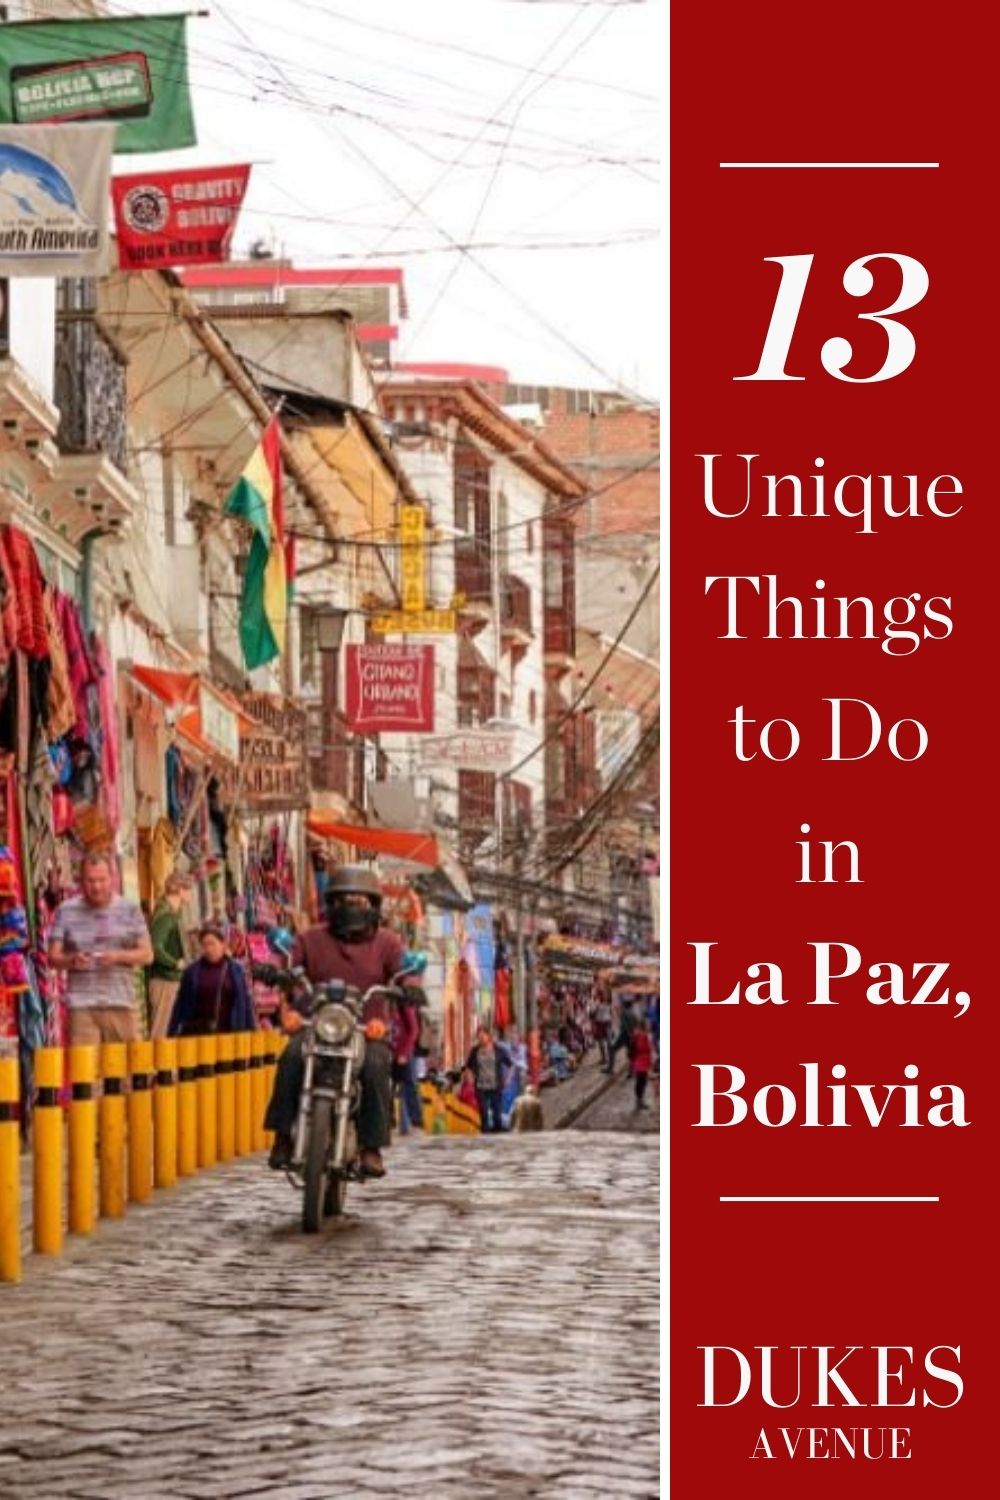 Image of a colorful street in La Paz, Bolivia with text overlay '13 Unique Things to do in La Paz, Bolivia'